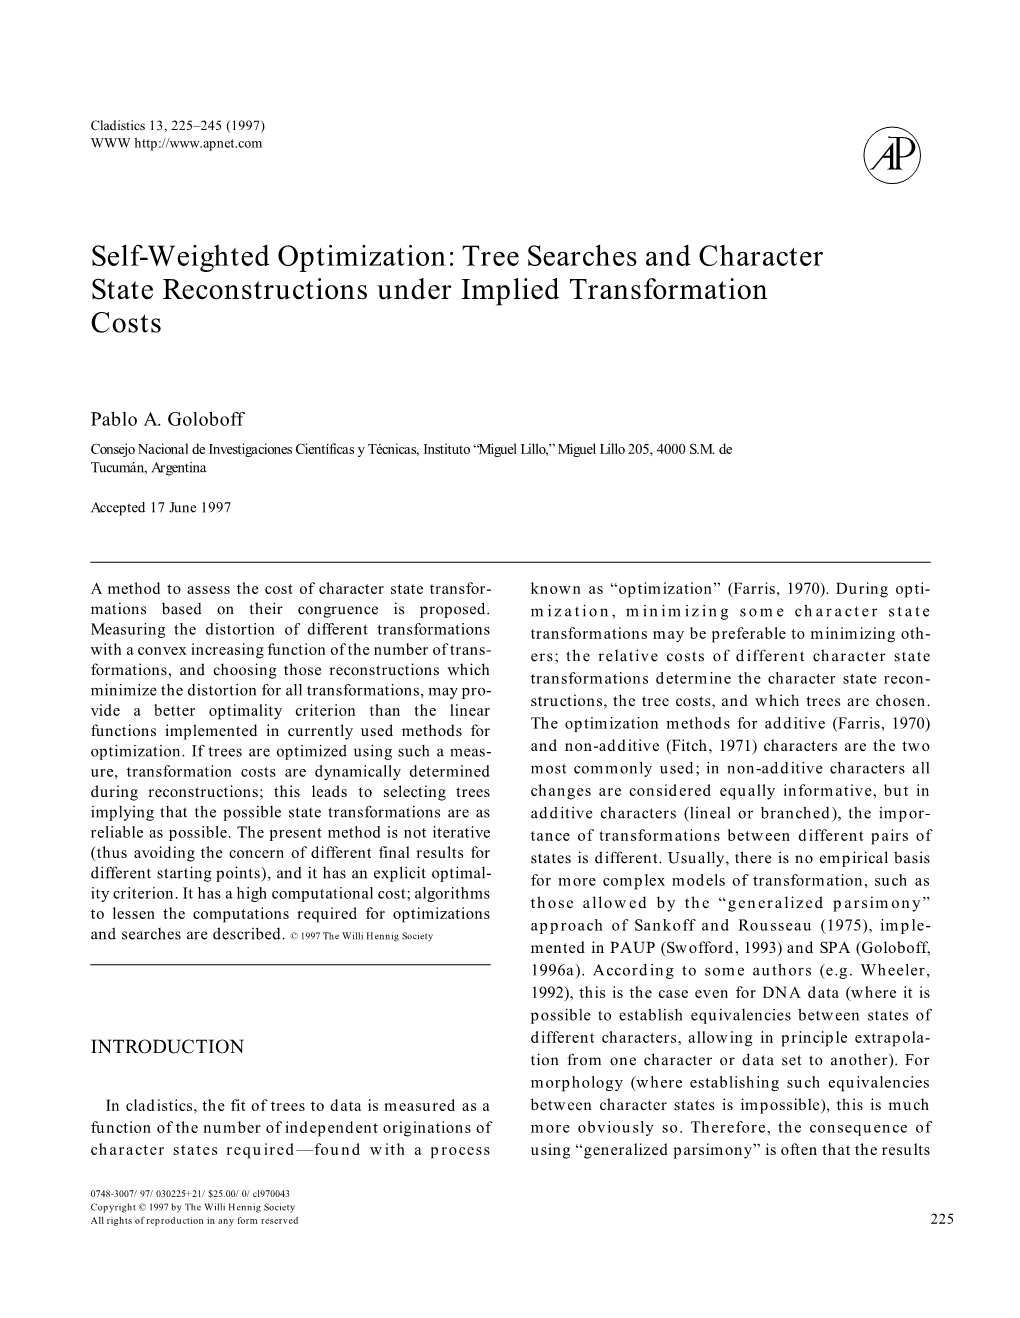 Self-Weighted Optimization: Tree Searches and Character State Reconstructions Under Implied Transformation Costs